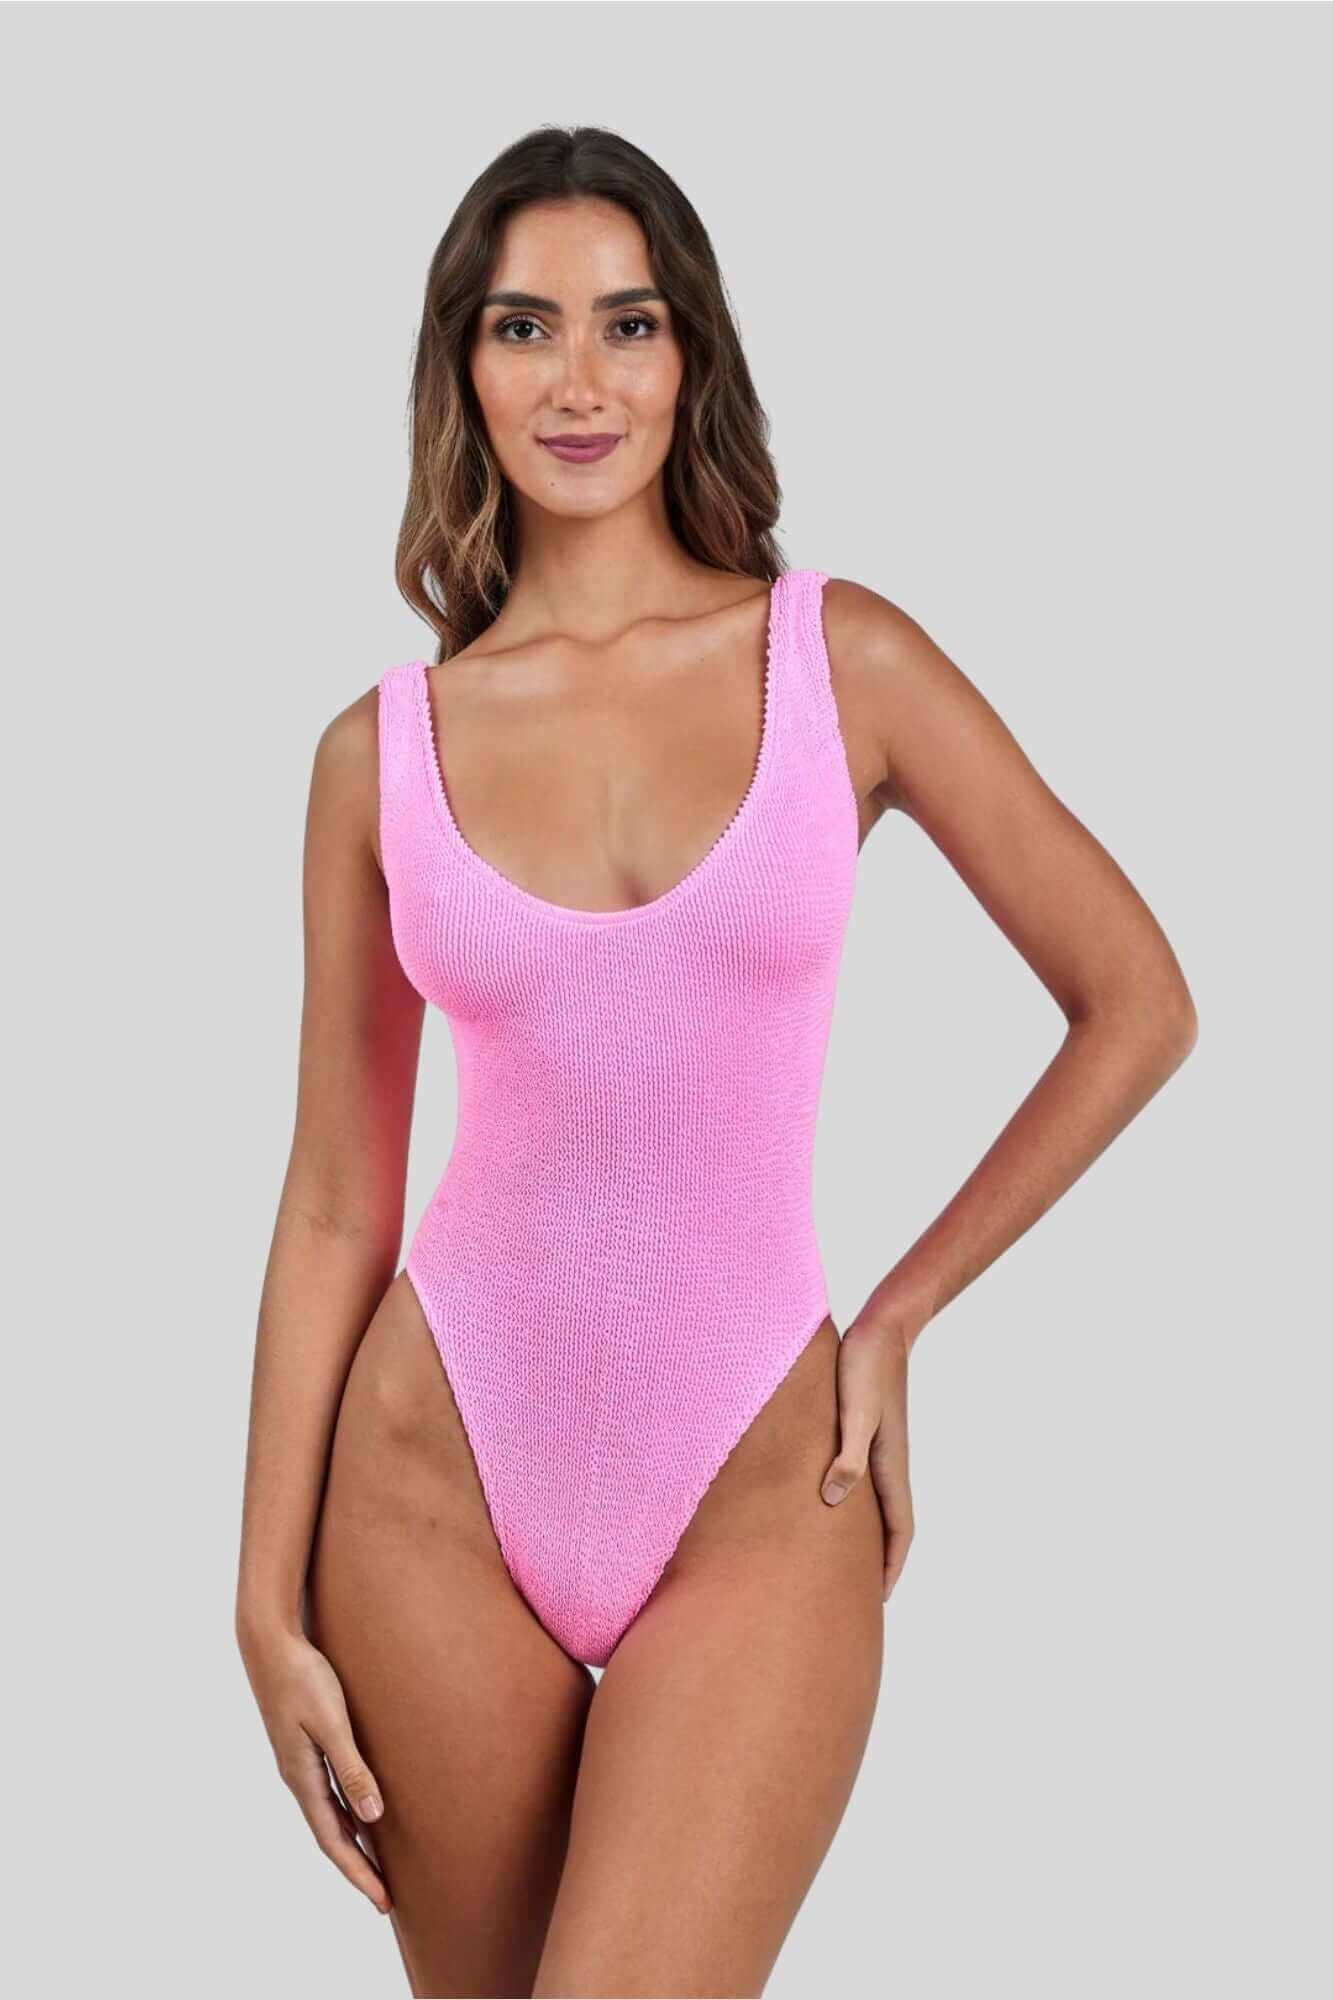 Marbella One Piece in Strawberry Pink